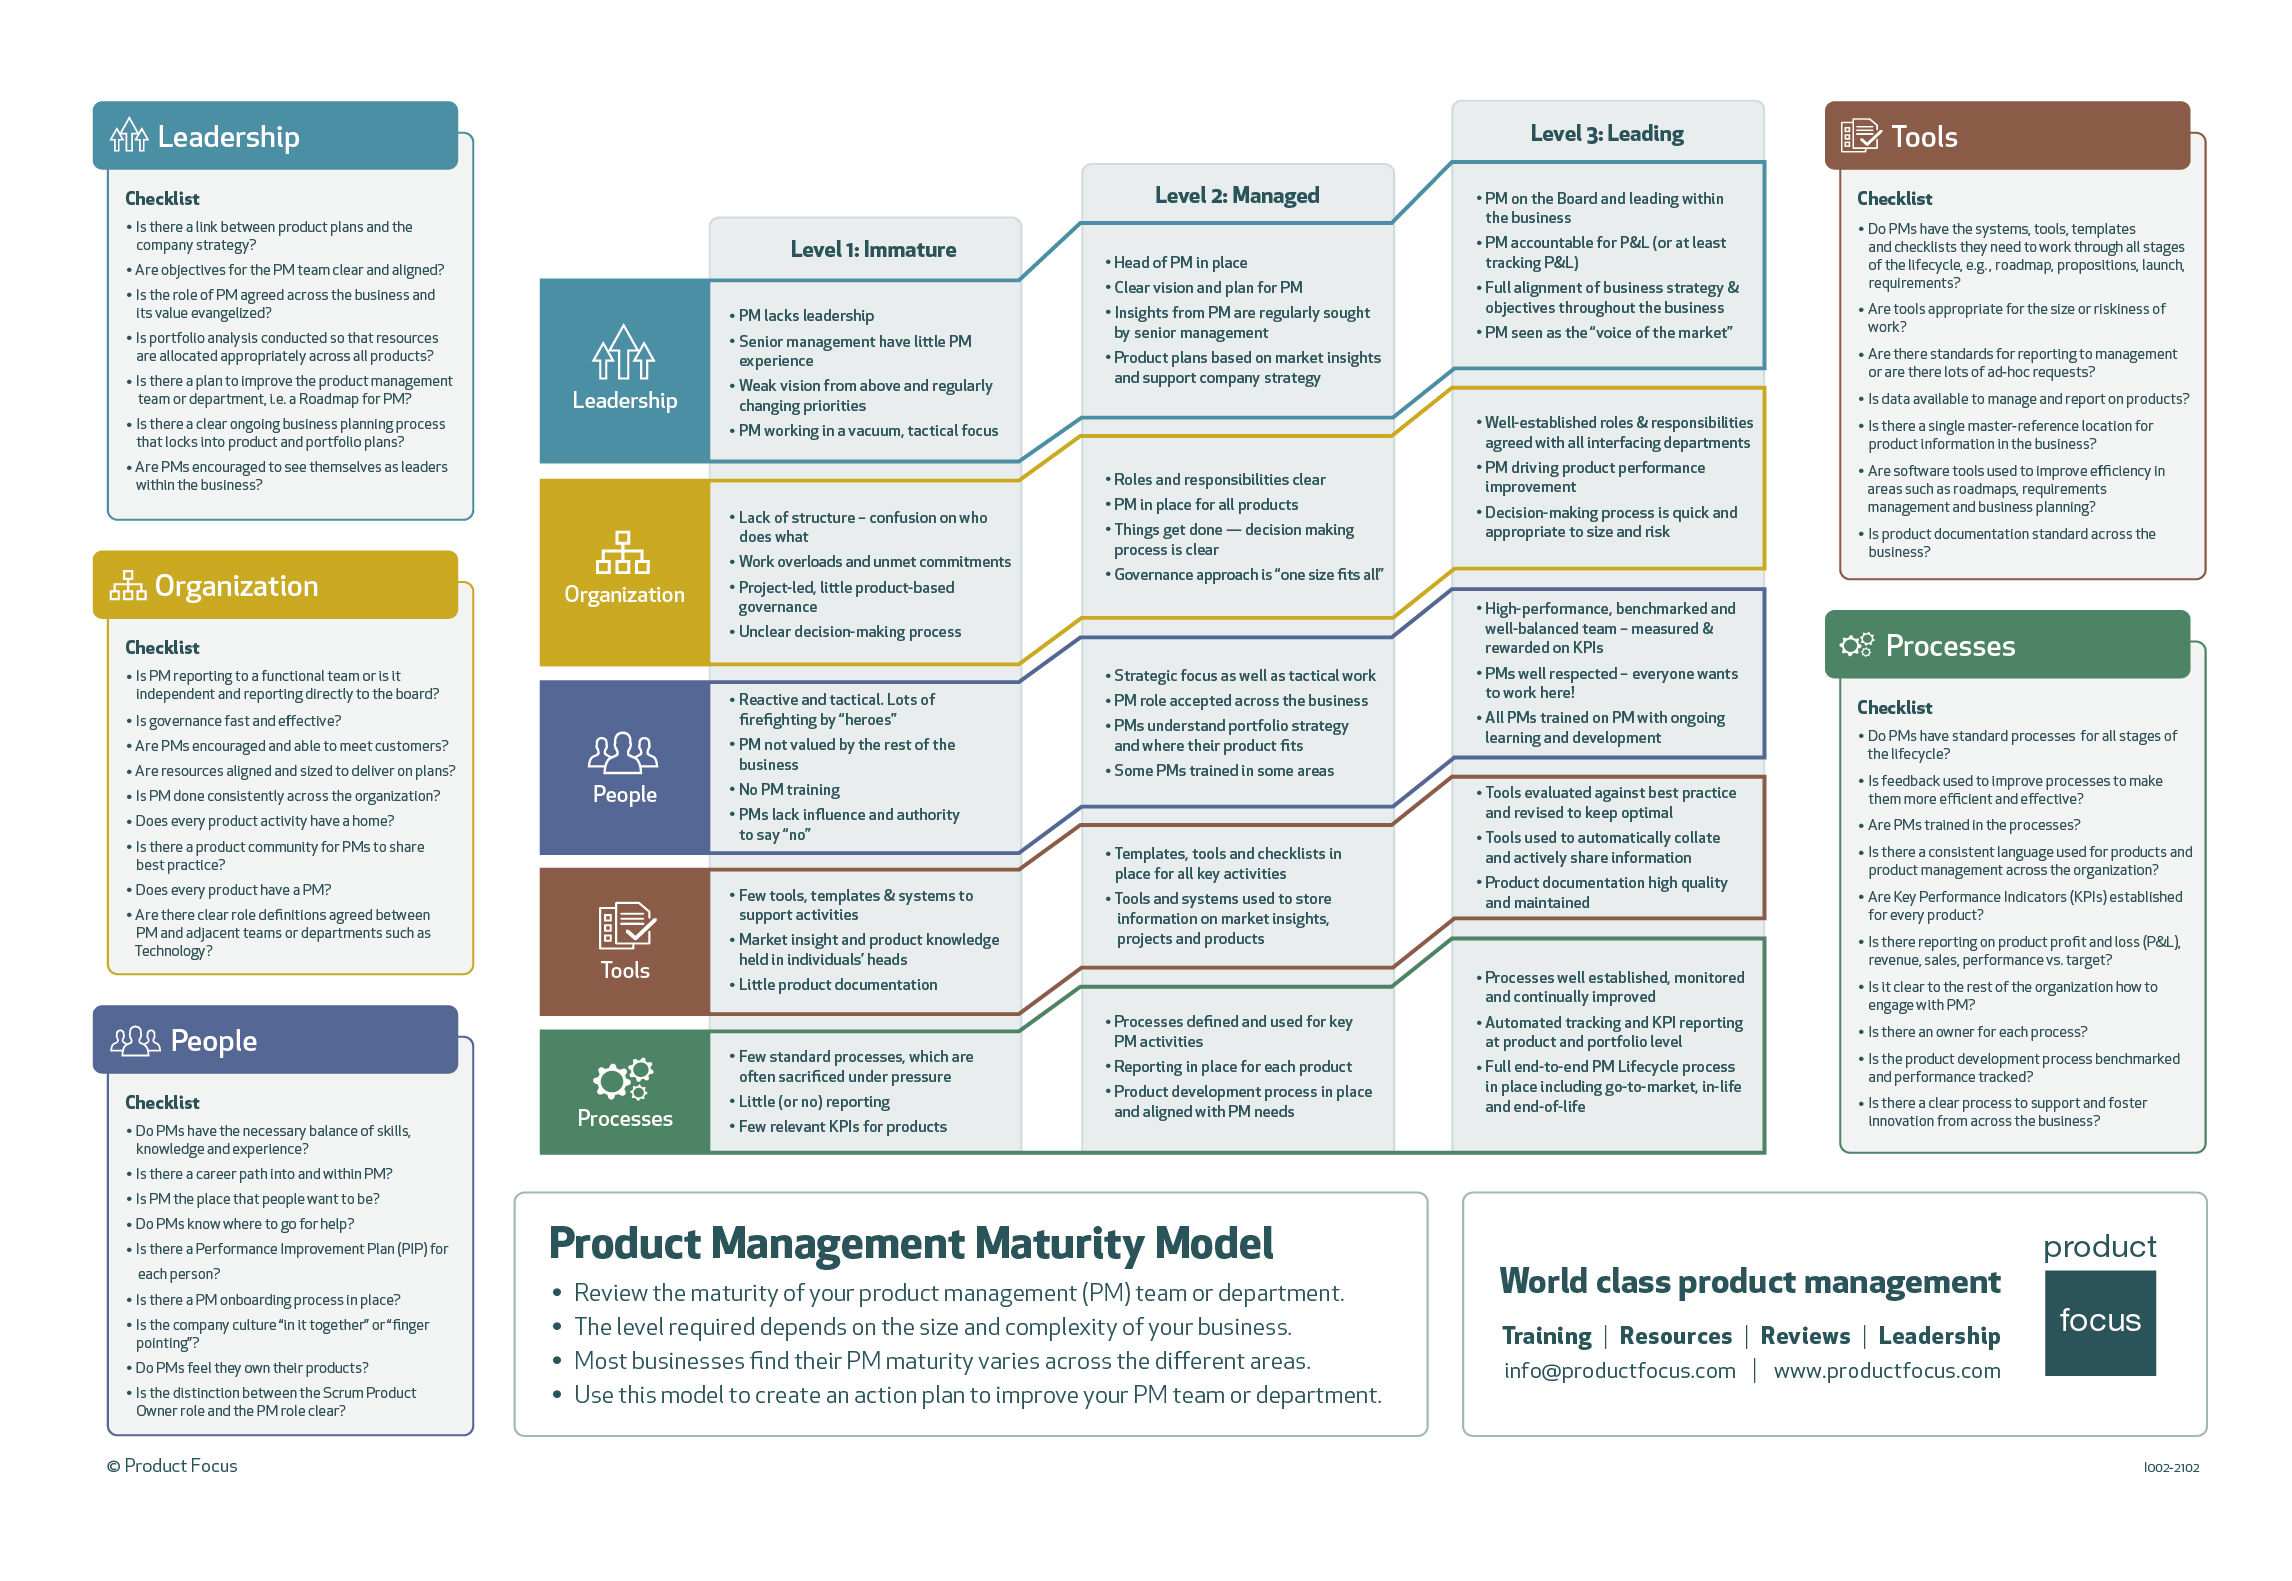 Product Management Maturity Model from Product Focus